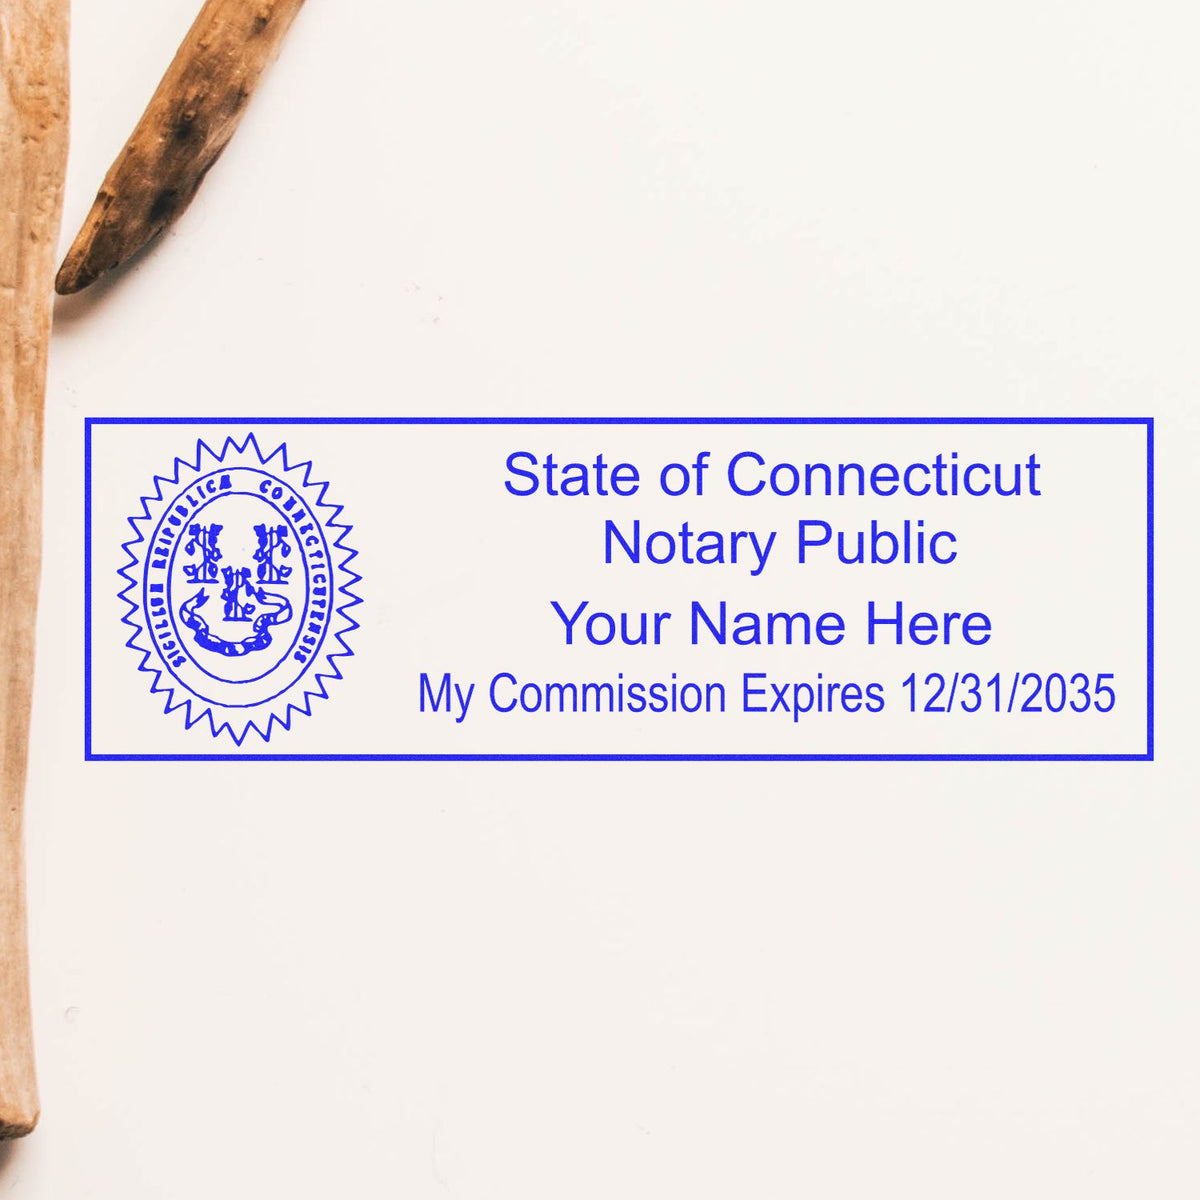 The PSI Connecticut Notary Stamp stamp impression comes to life with a crisp, detailed photo on paper - showcasing true professional quality.